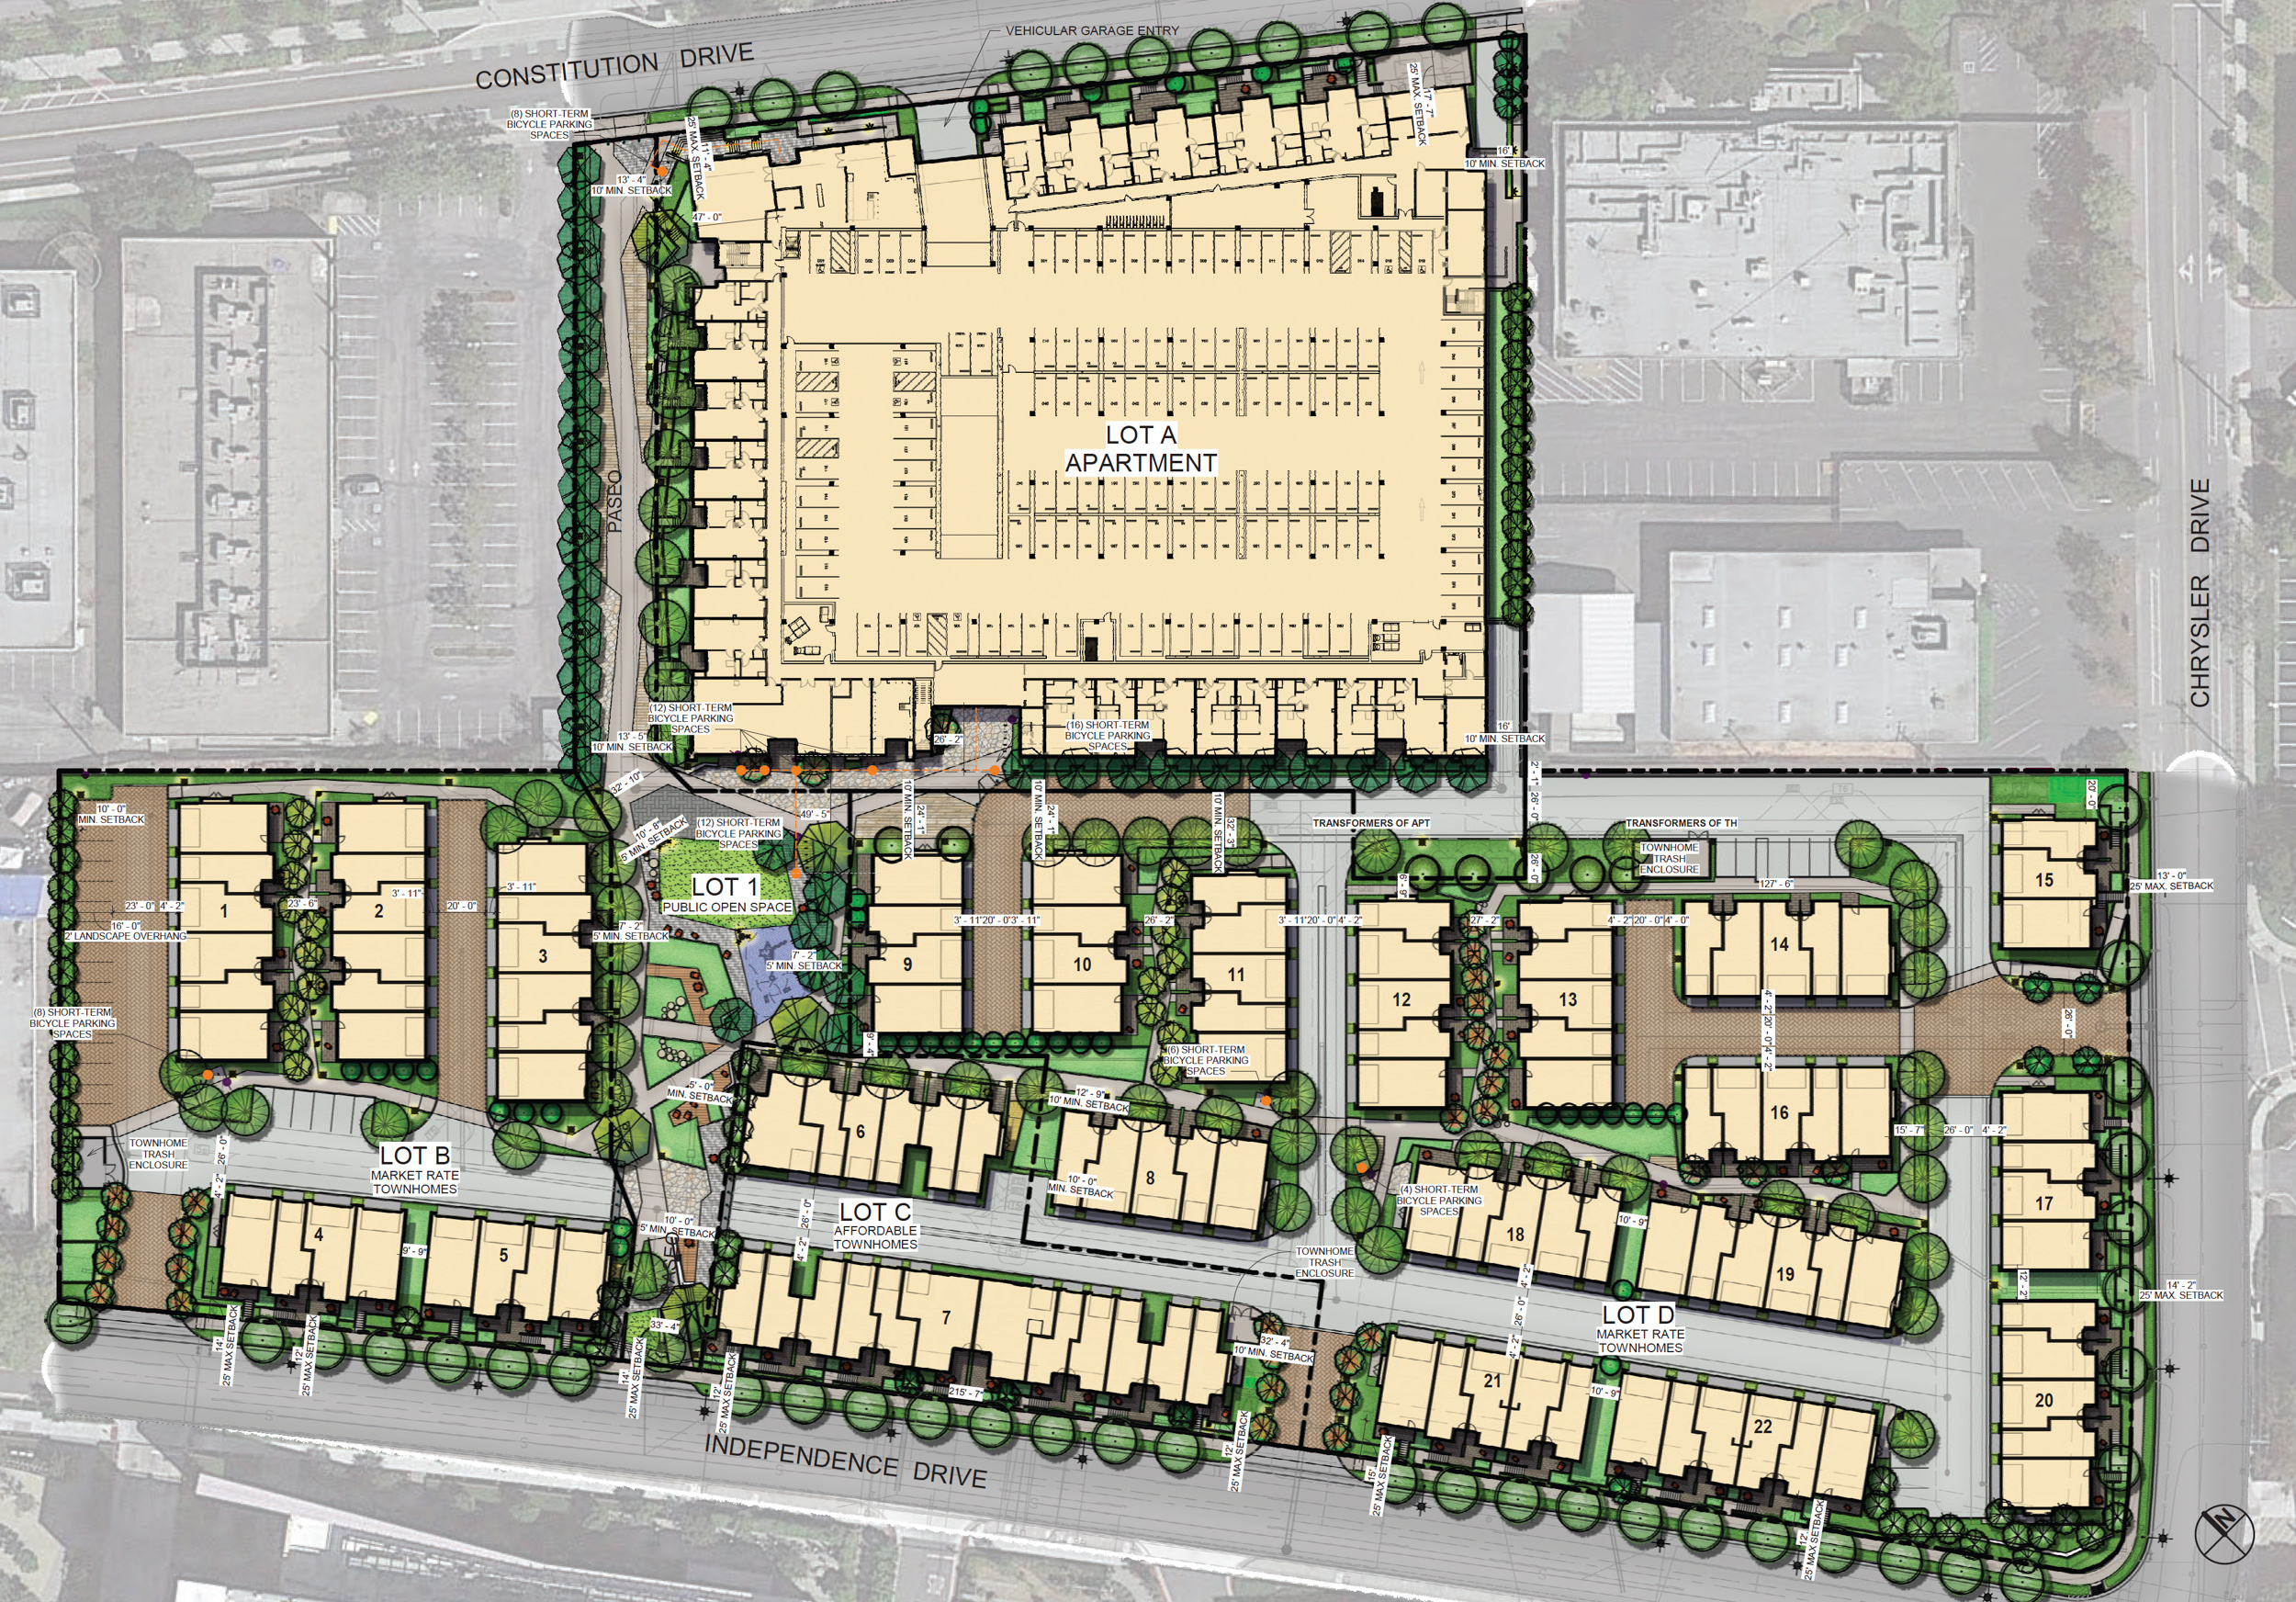 123 Independence Drive site map, illustration by the Guzzardo Partnership